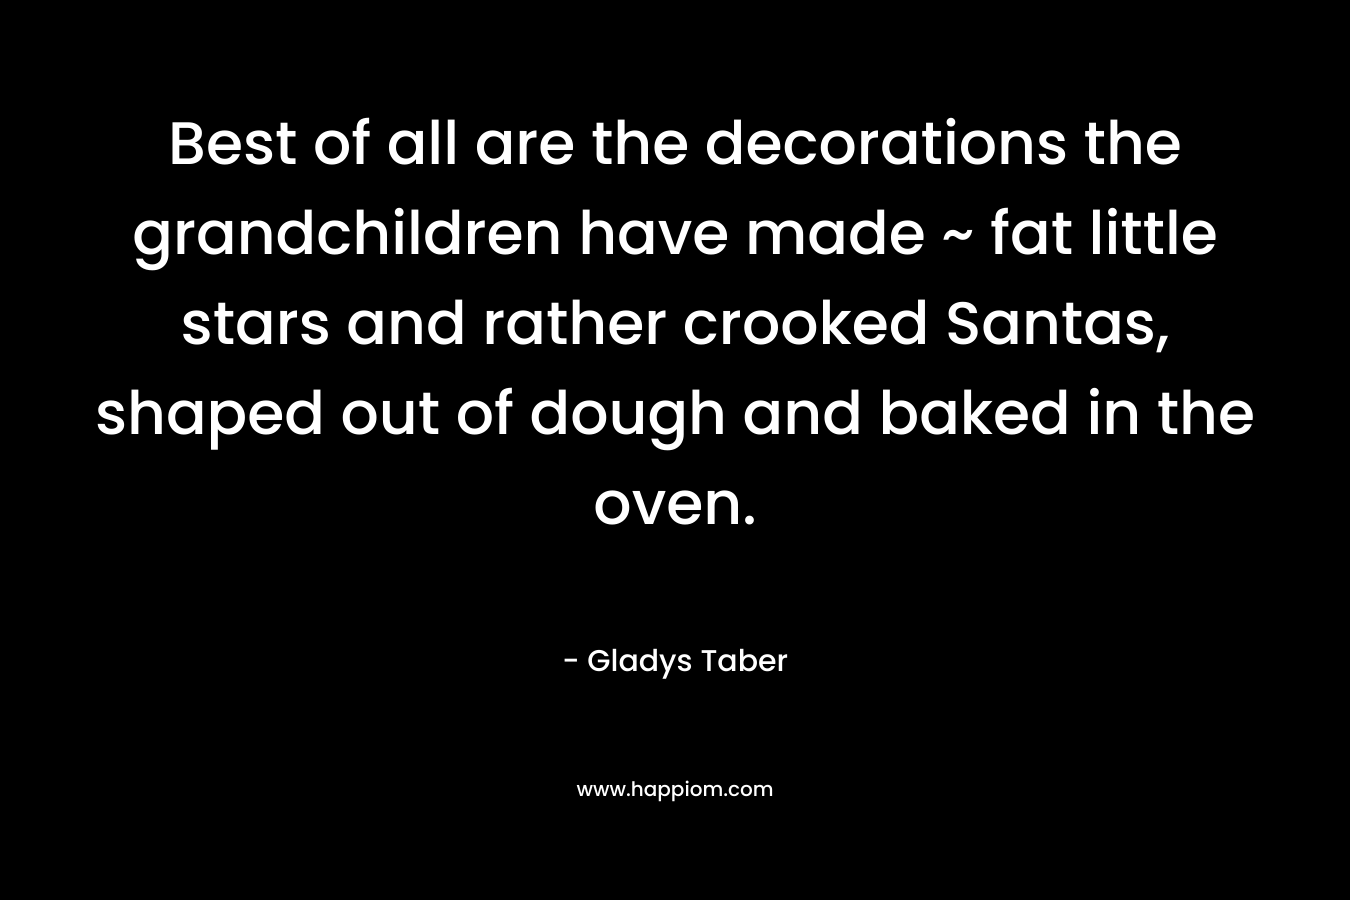 Best of all are the decorations the grandchildren have made ~ fat little stars and rather crooked Santas, shaped out of dough and baked in the oven. – Gladys Taber